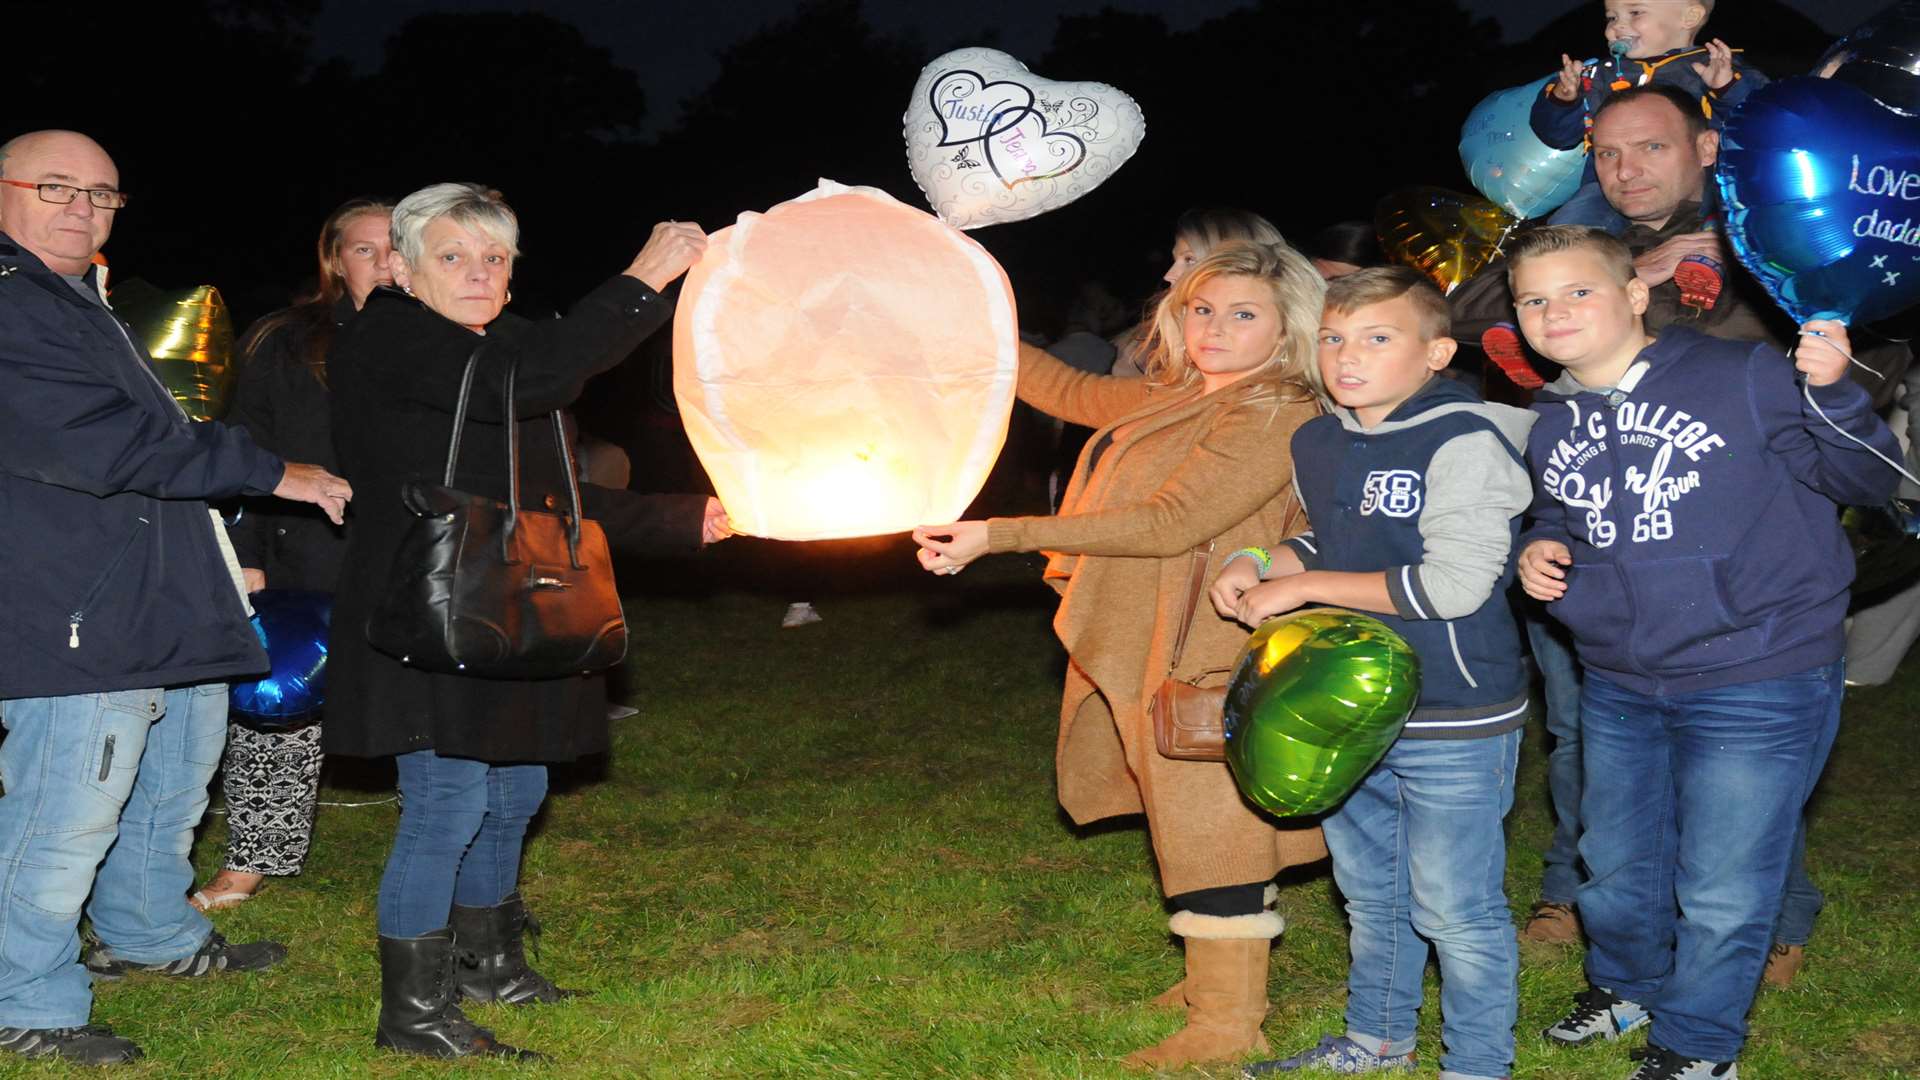 Jemma with family and friends at the release of balloons and lanterns in Justin's memory